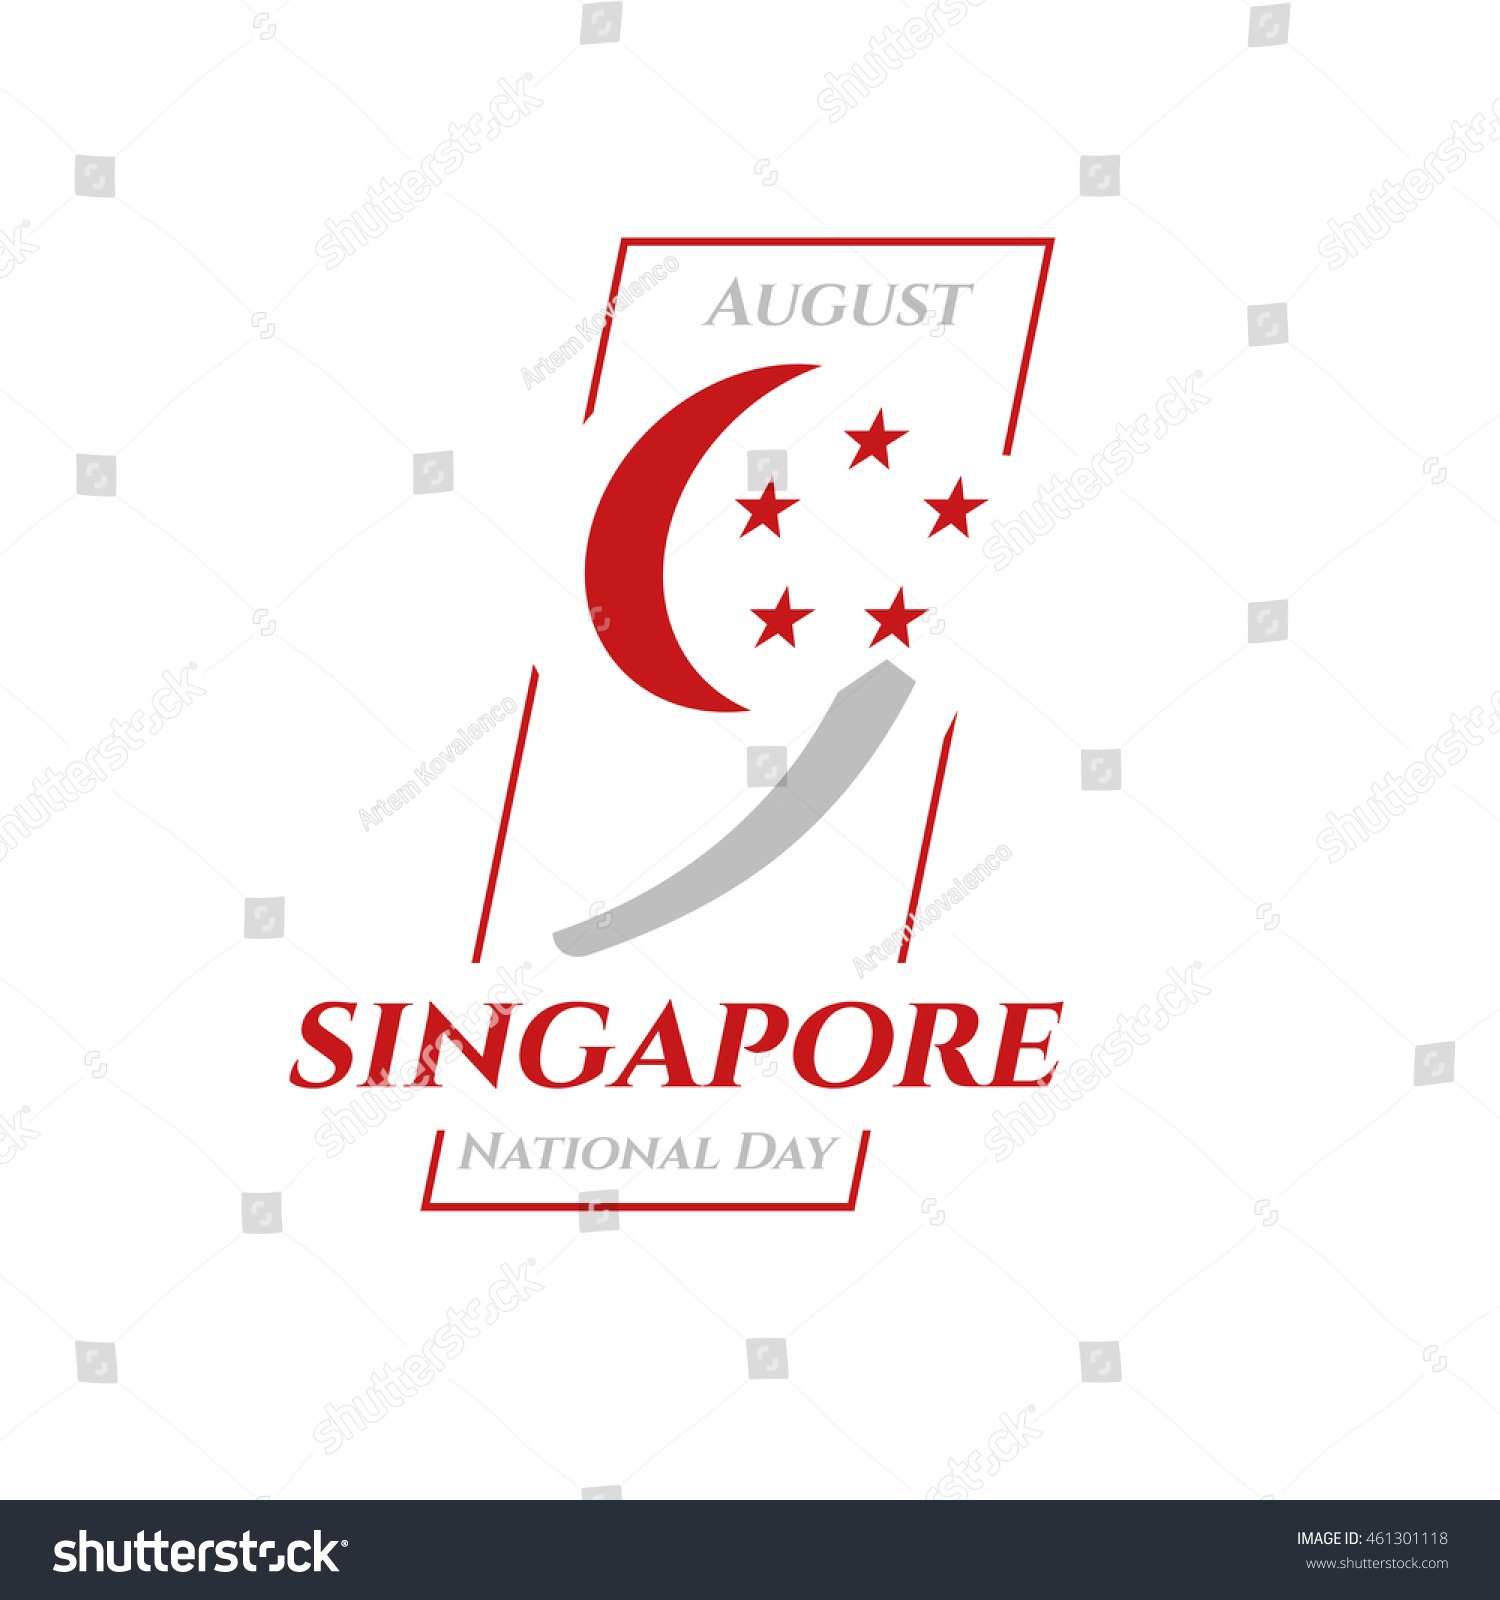 August 9 Singapore National Day Card